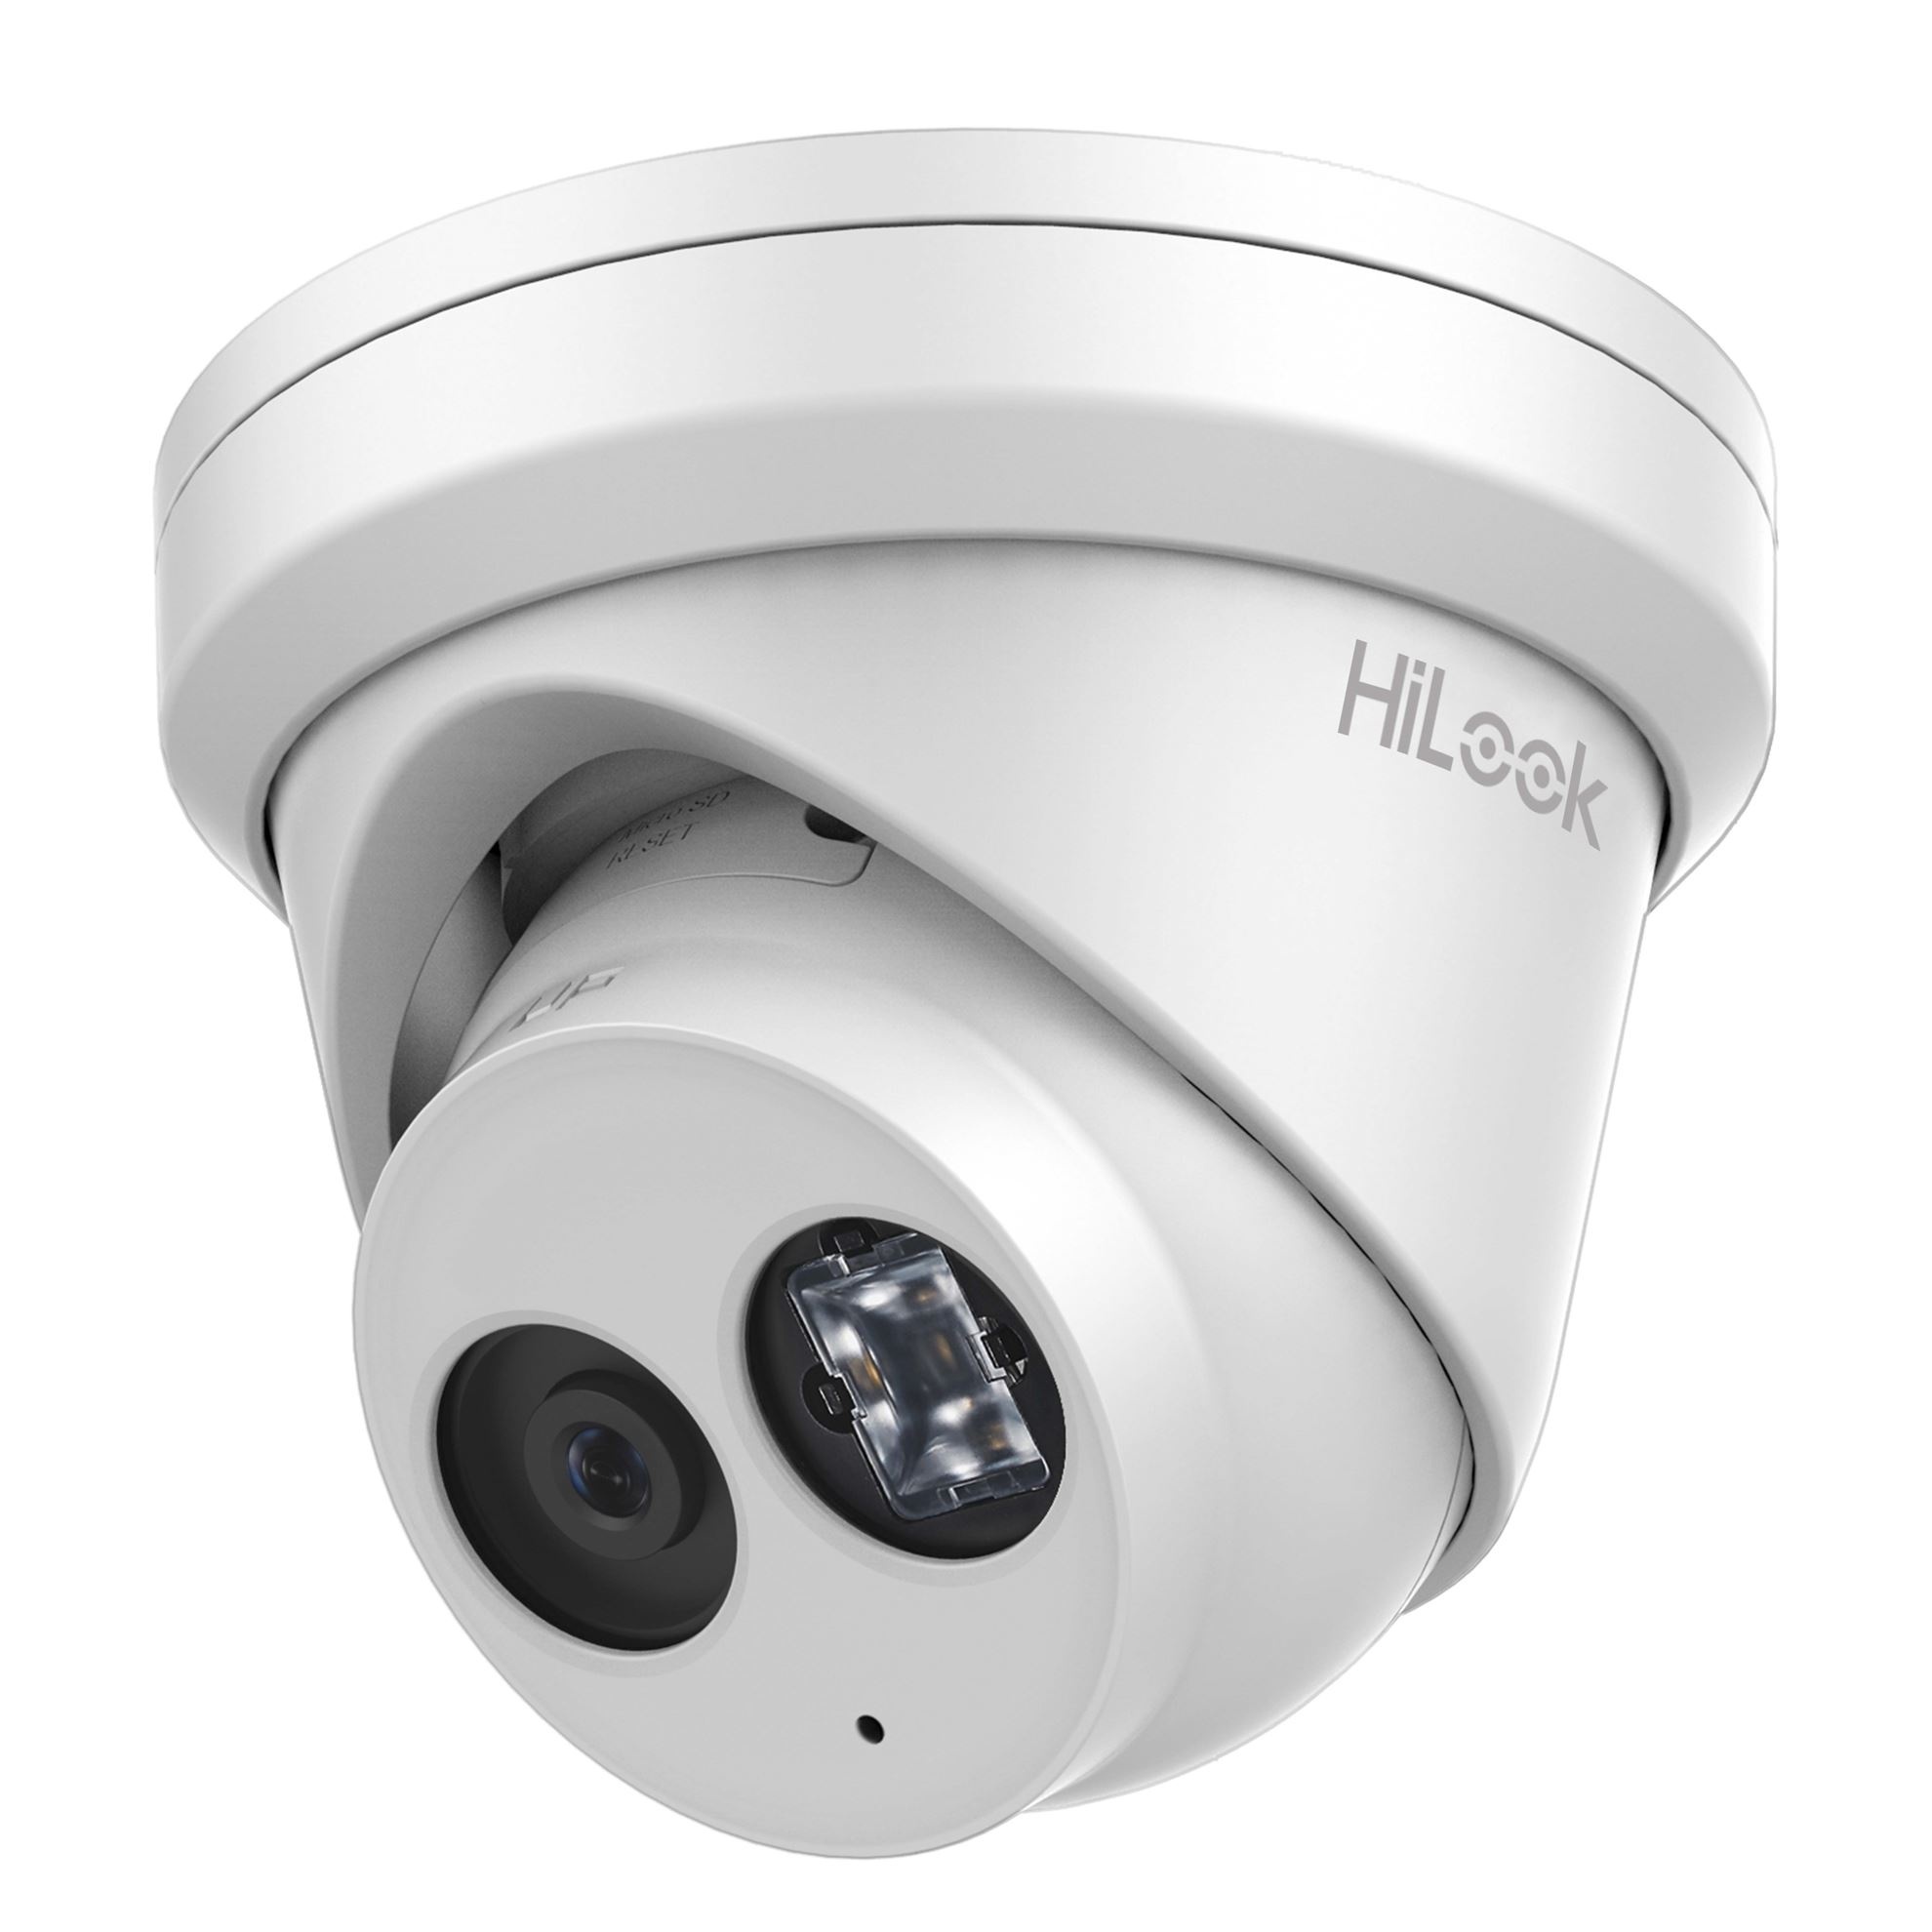 HILOOK 8MP IP POE Turret Camera with 4mm Fixed Lens